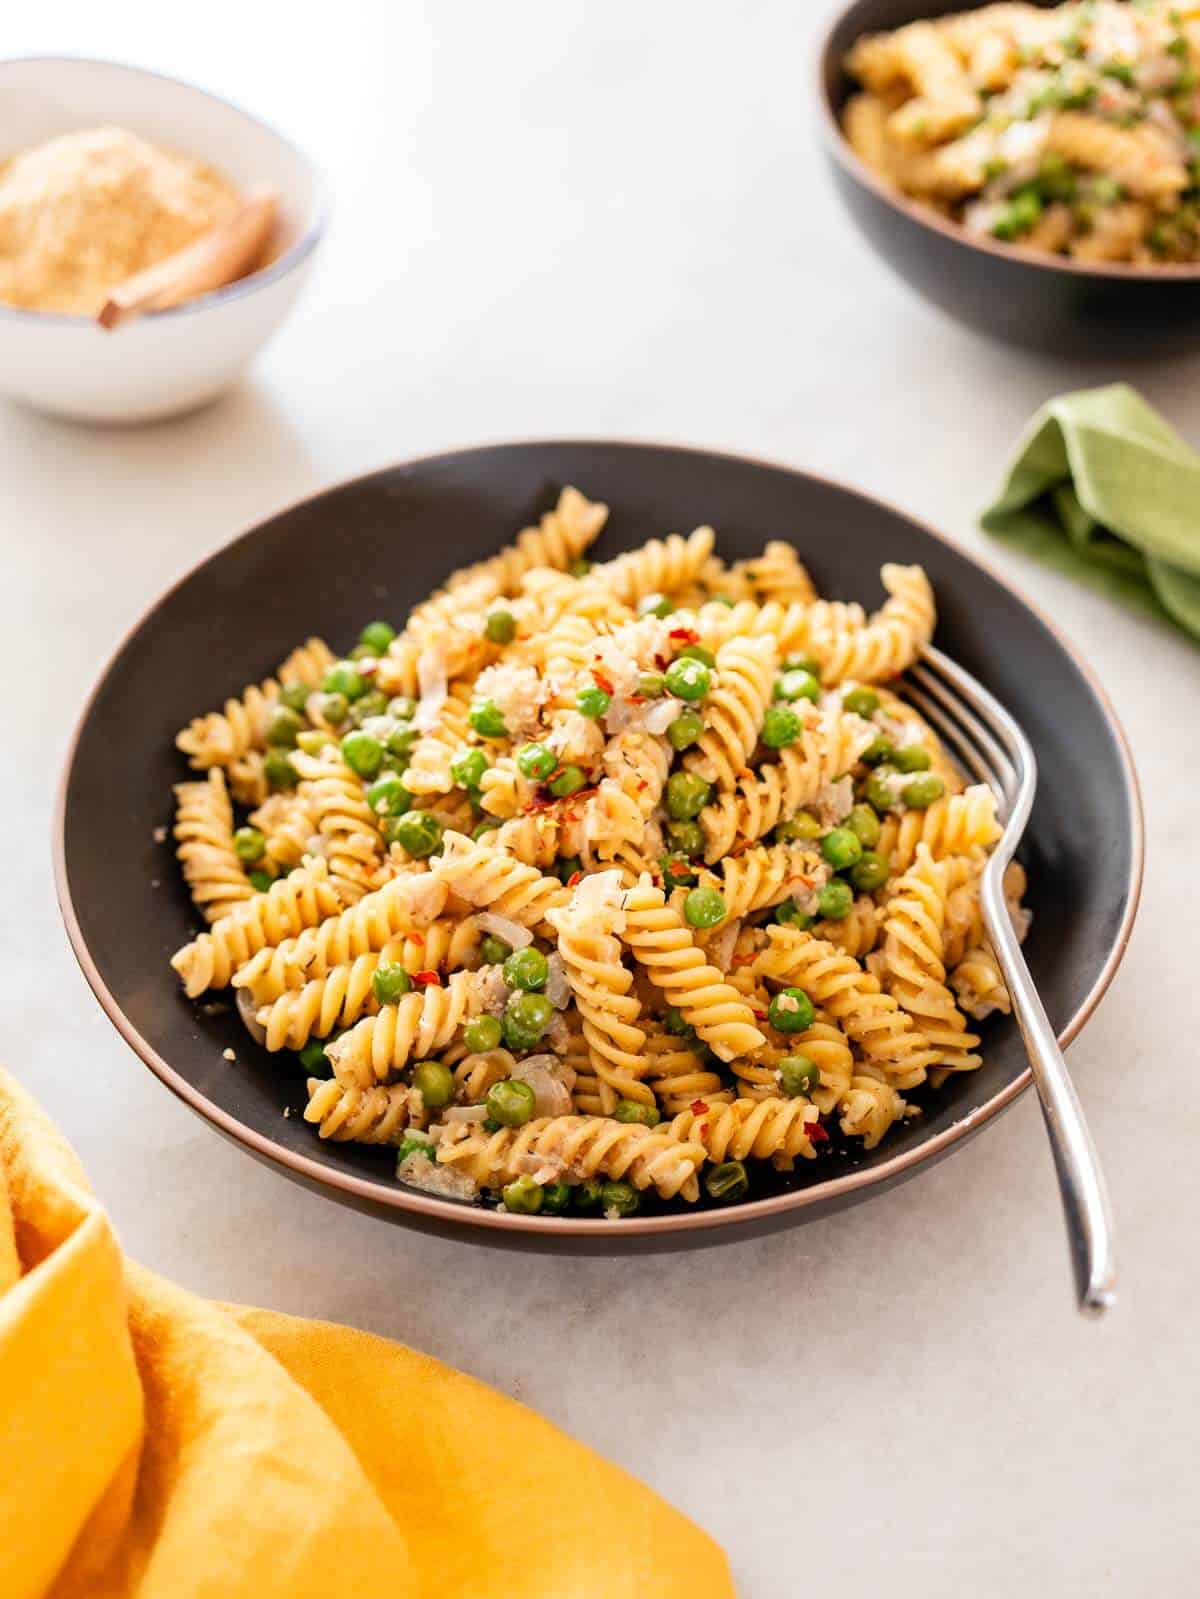 Italian peas and pasta Recipe served with red pepper flakes.